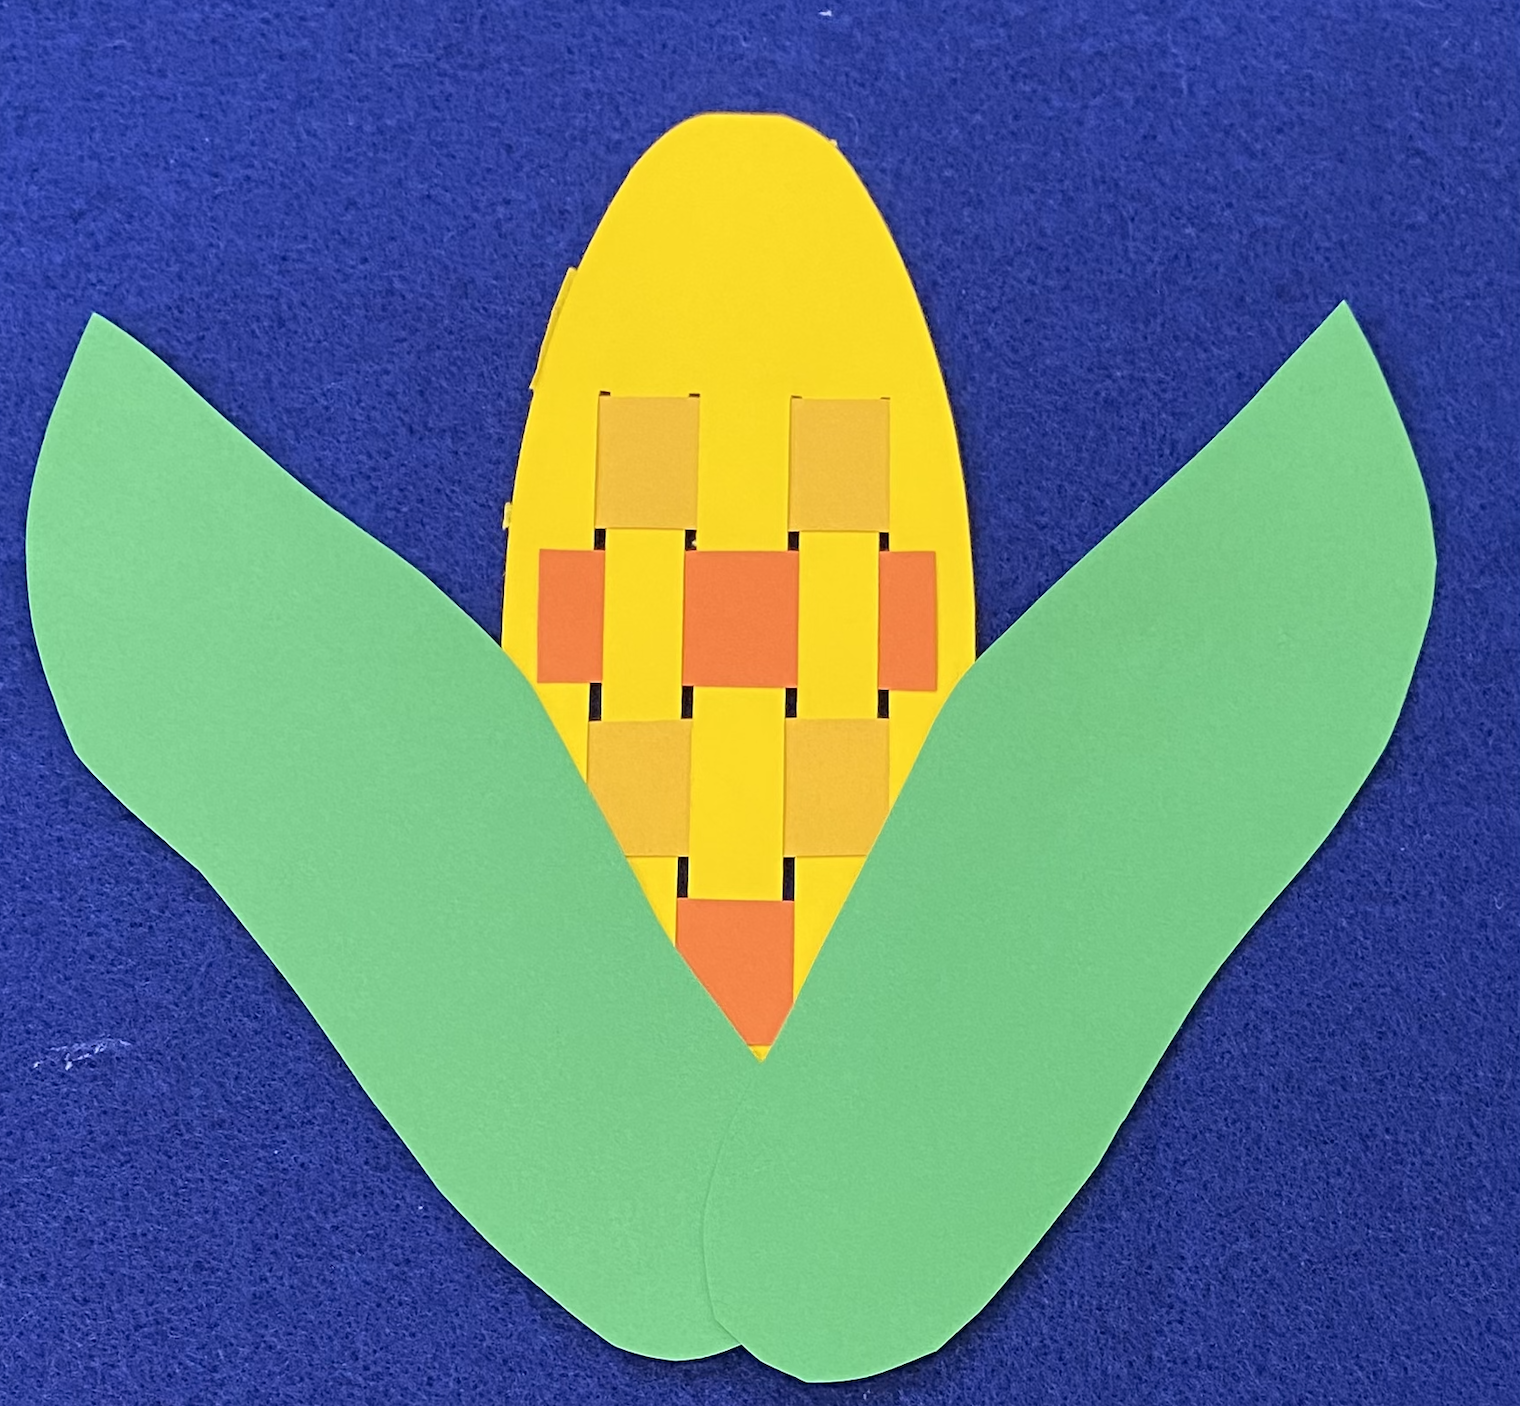 An ear of corn made out of yellow, gold, orange, and green paper on a blue background